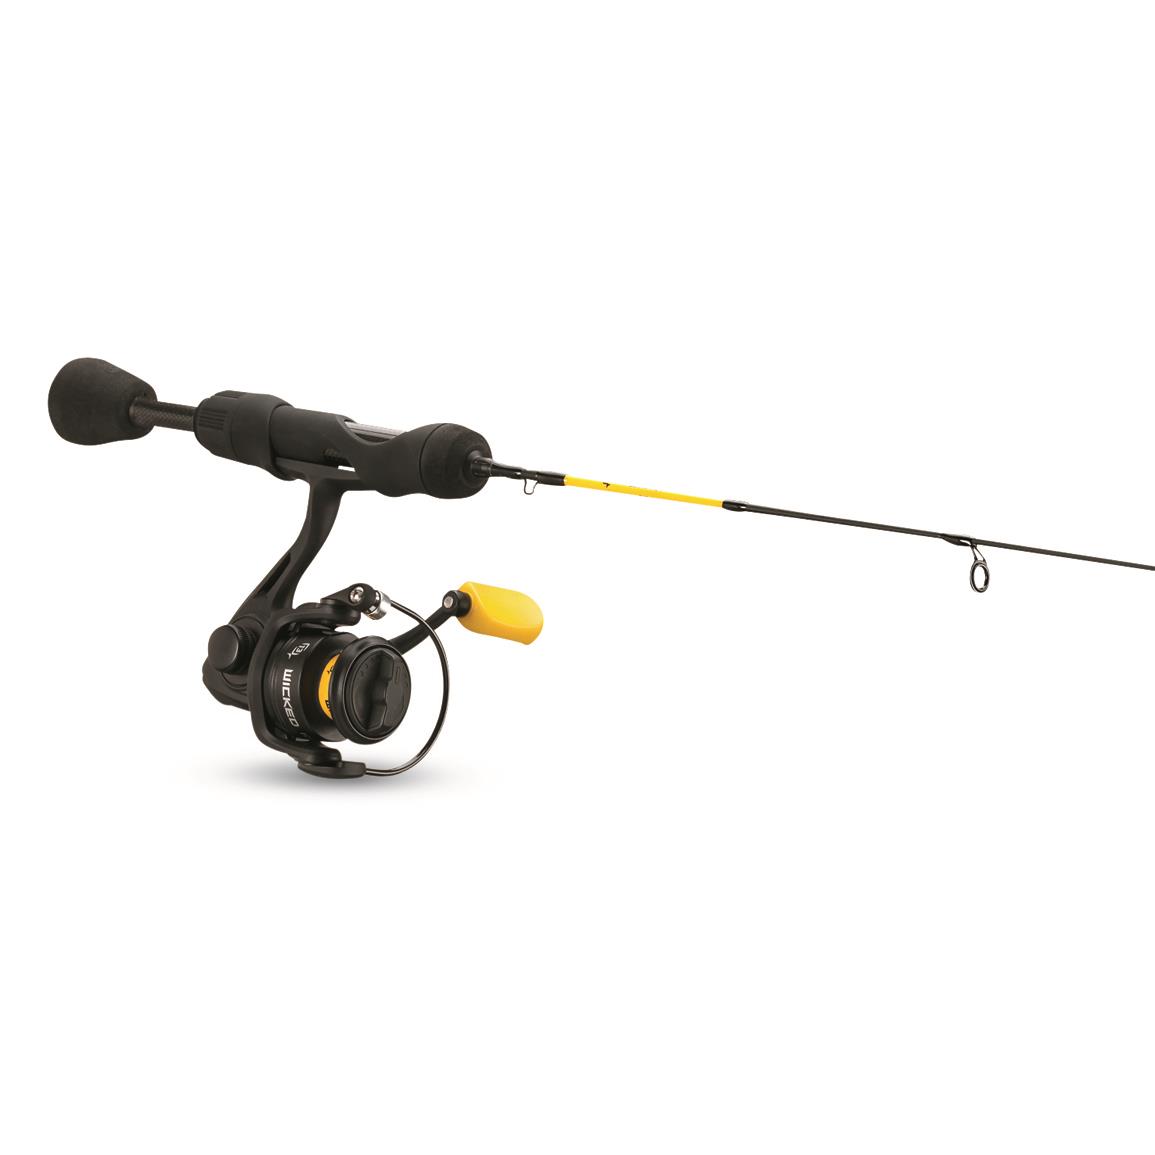 13 Fishing Snitch Pro Ice Fishing Spinning Rod and Reel Combo, 23